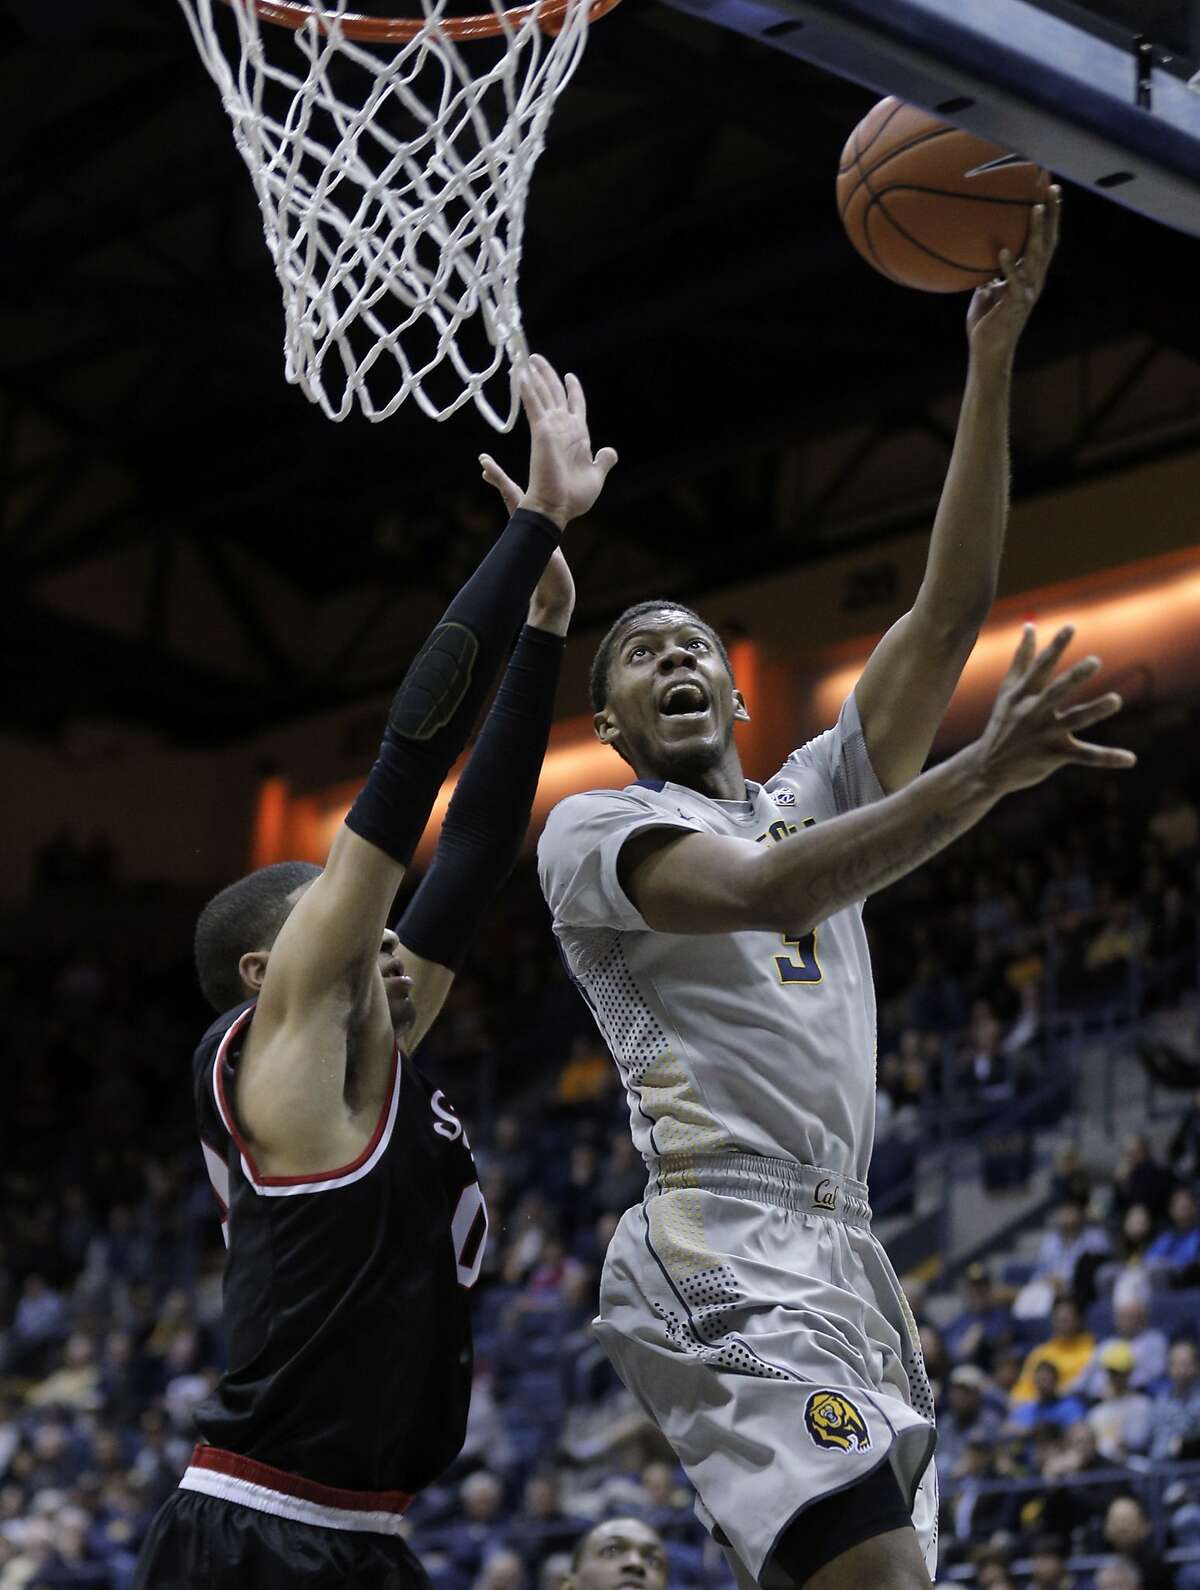 Tyrone Wallace (3) puts in a shot and is fouled on the play in the second half as the Cal Bears played the Seattle University Redhawks at Haas Pavilion in Berkeley, Calif., on Tuesday, December 1, 2015. Cal won 66-52.